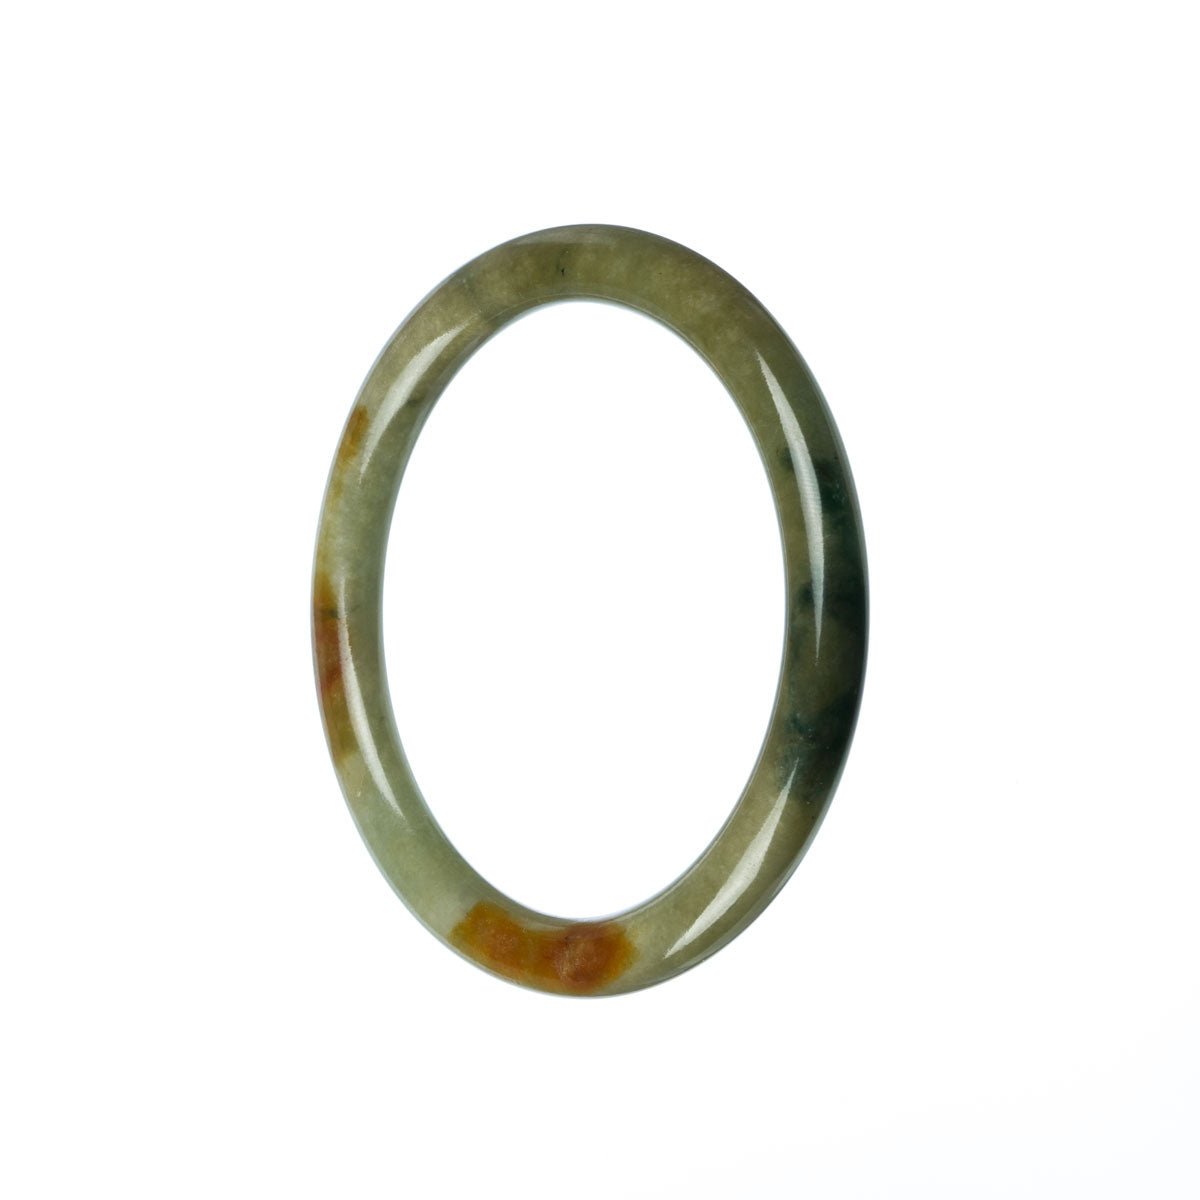 A close-up photo of a small, round Type A green jade bangle bracelet, measuring 55mm in diameter. The bracelet is made of genuine jade and has a vibrant green color. It is a petite and elegant piece of jewelry.